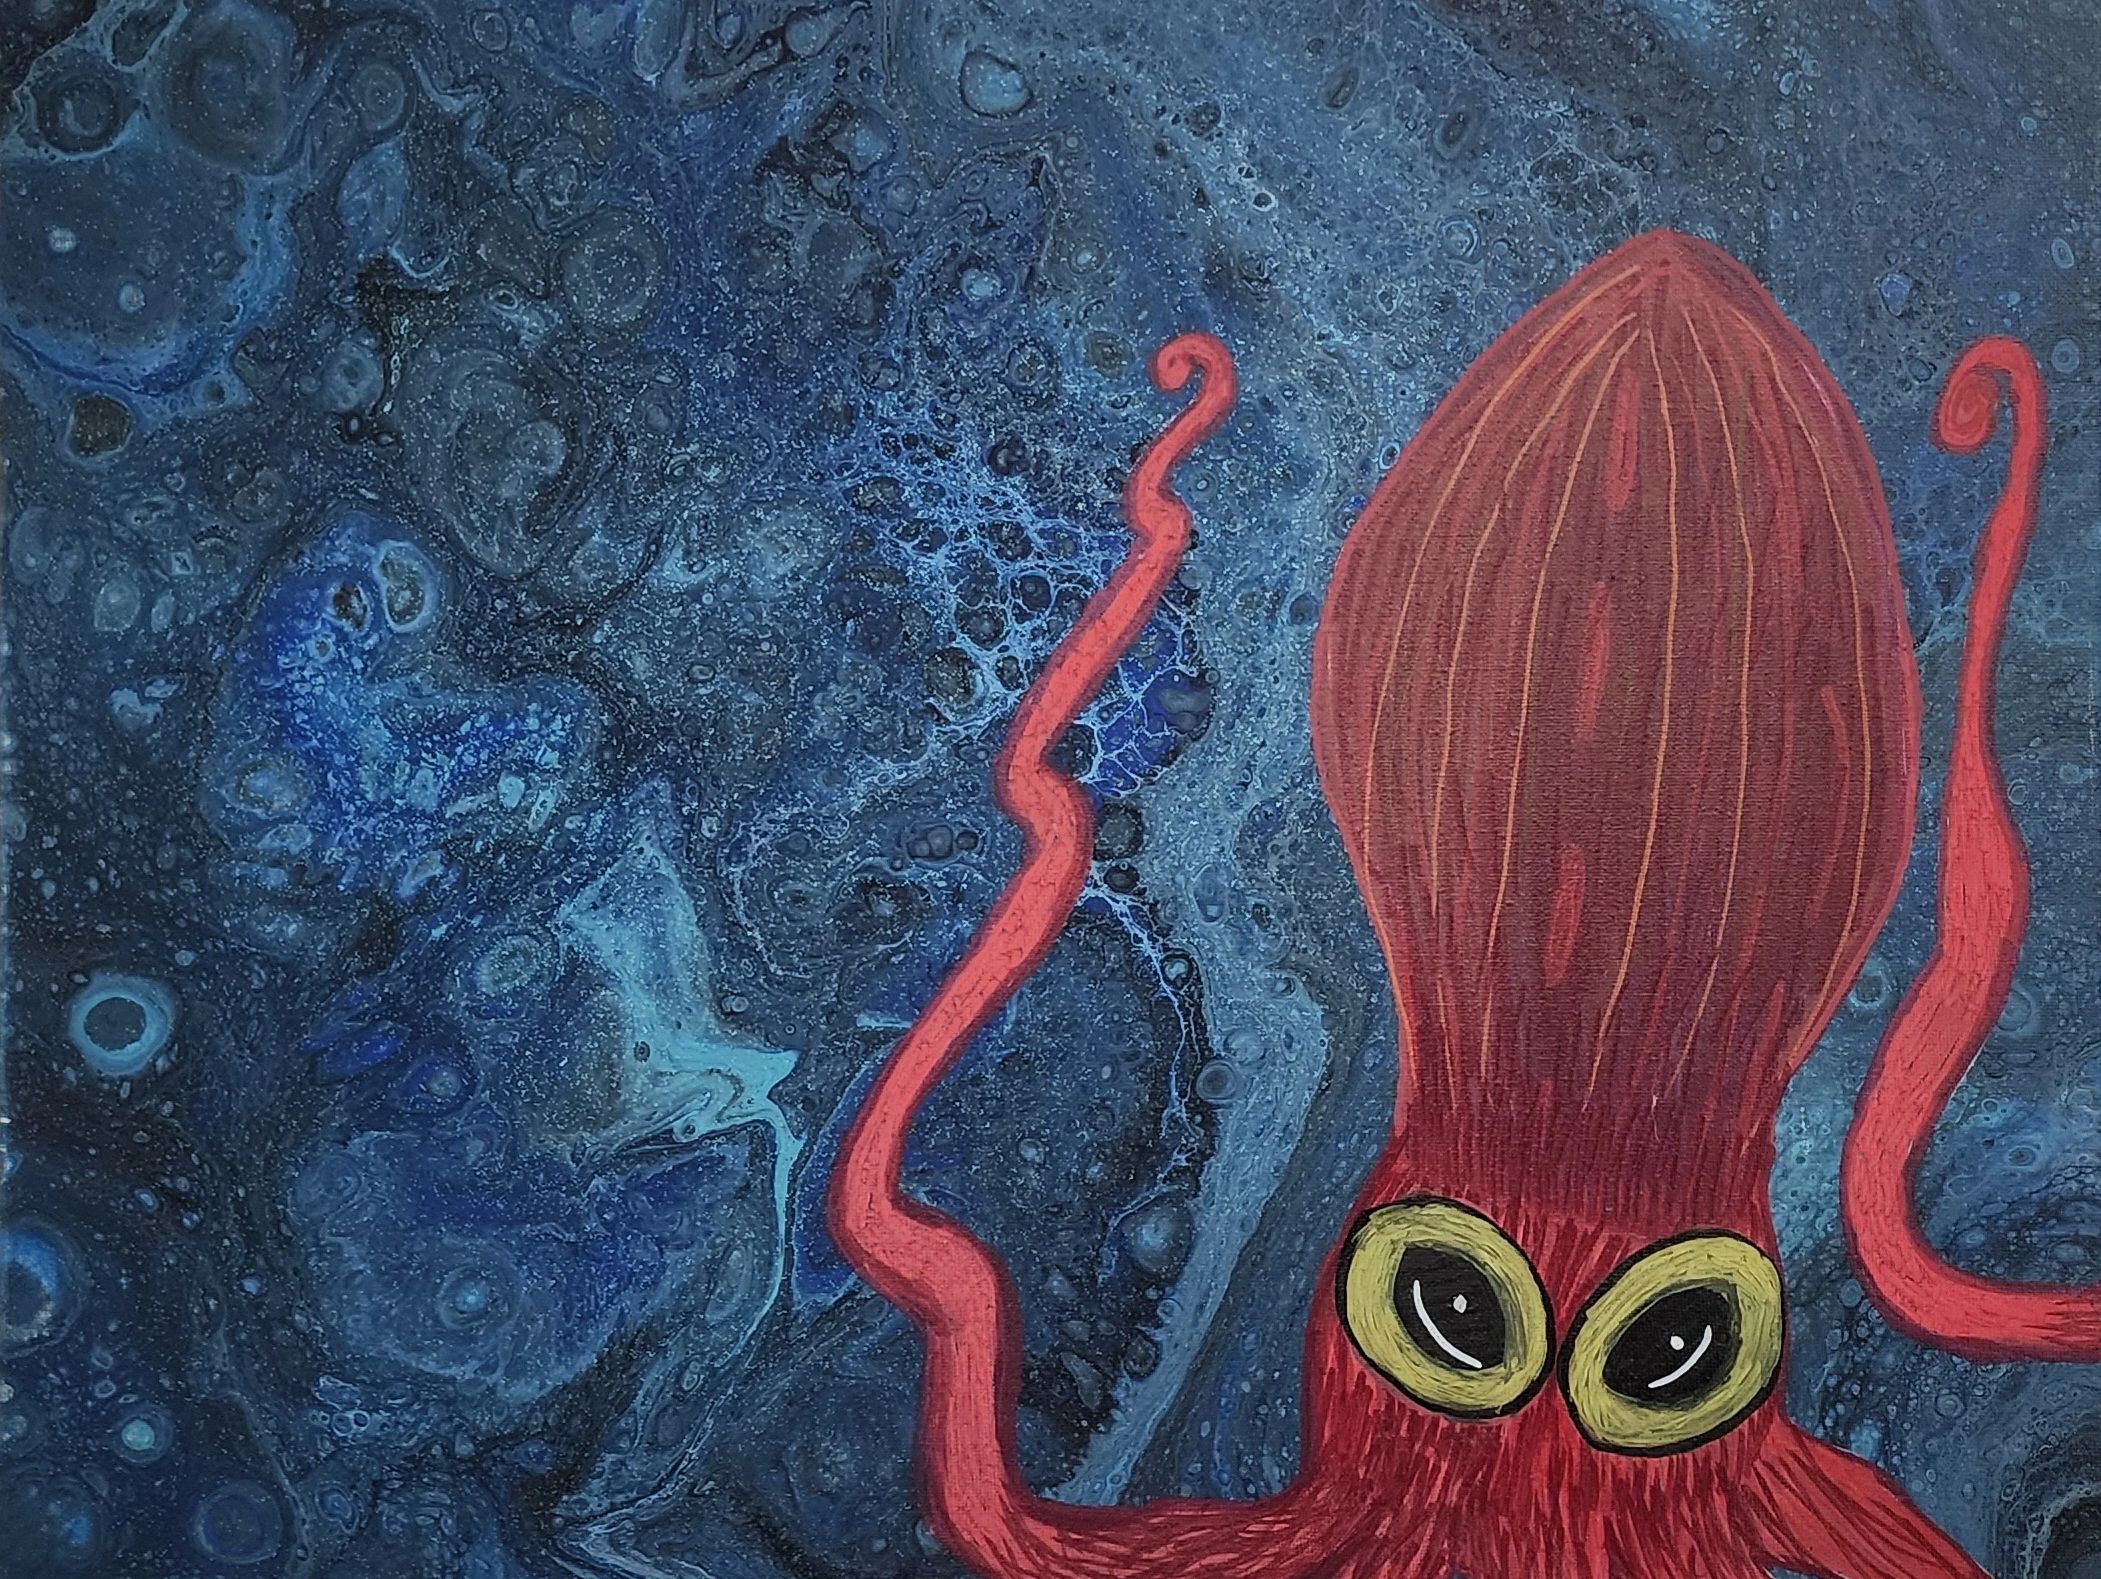 A squid in space done with acrylic paint pens over an acrylic pouring by author Jaime Johnesee 